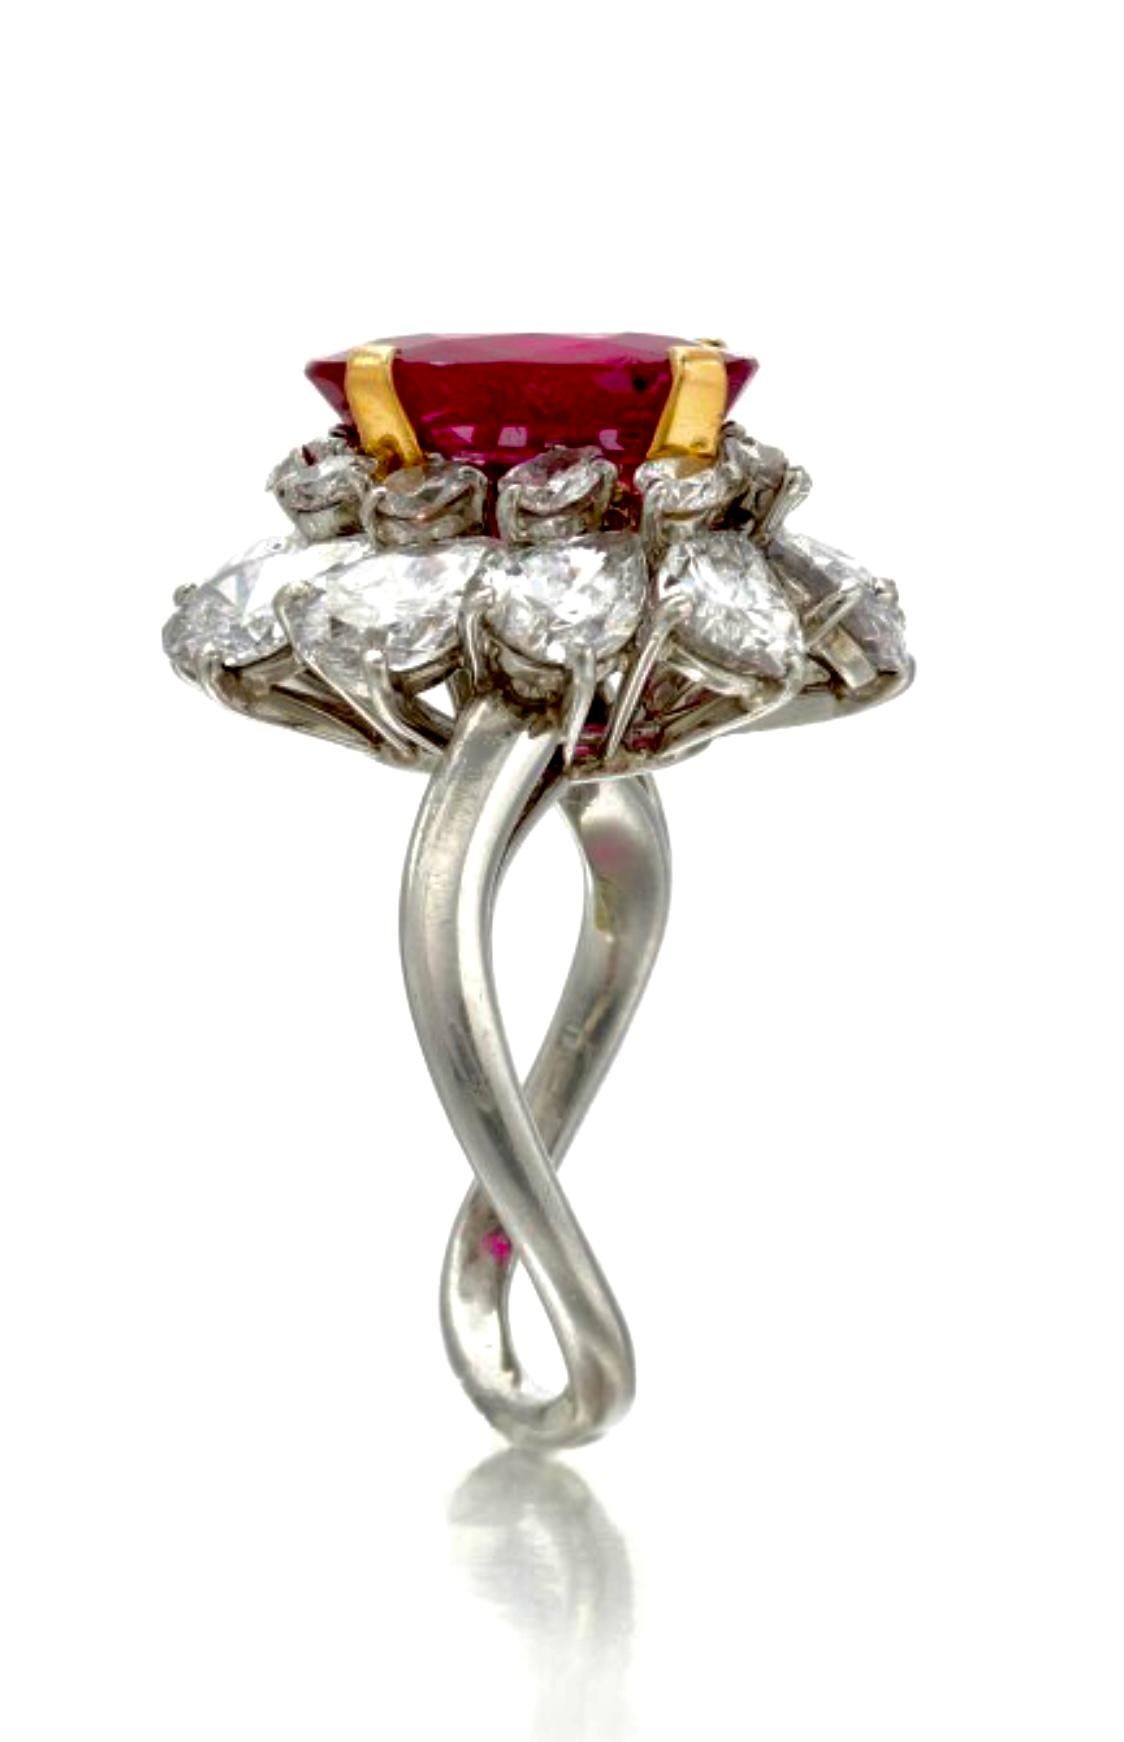 Exceptional Bulgari Burmese ruby and diamond 'Ballerina' ring. An important piece, set to centre with a Oval shape old cut natural unenhanced Burmese ruby, with an approximate weight of 3,67 carats in a stunning Platinum setting, flanked by 20